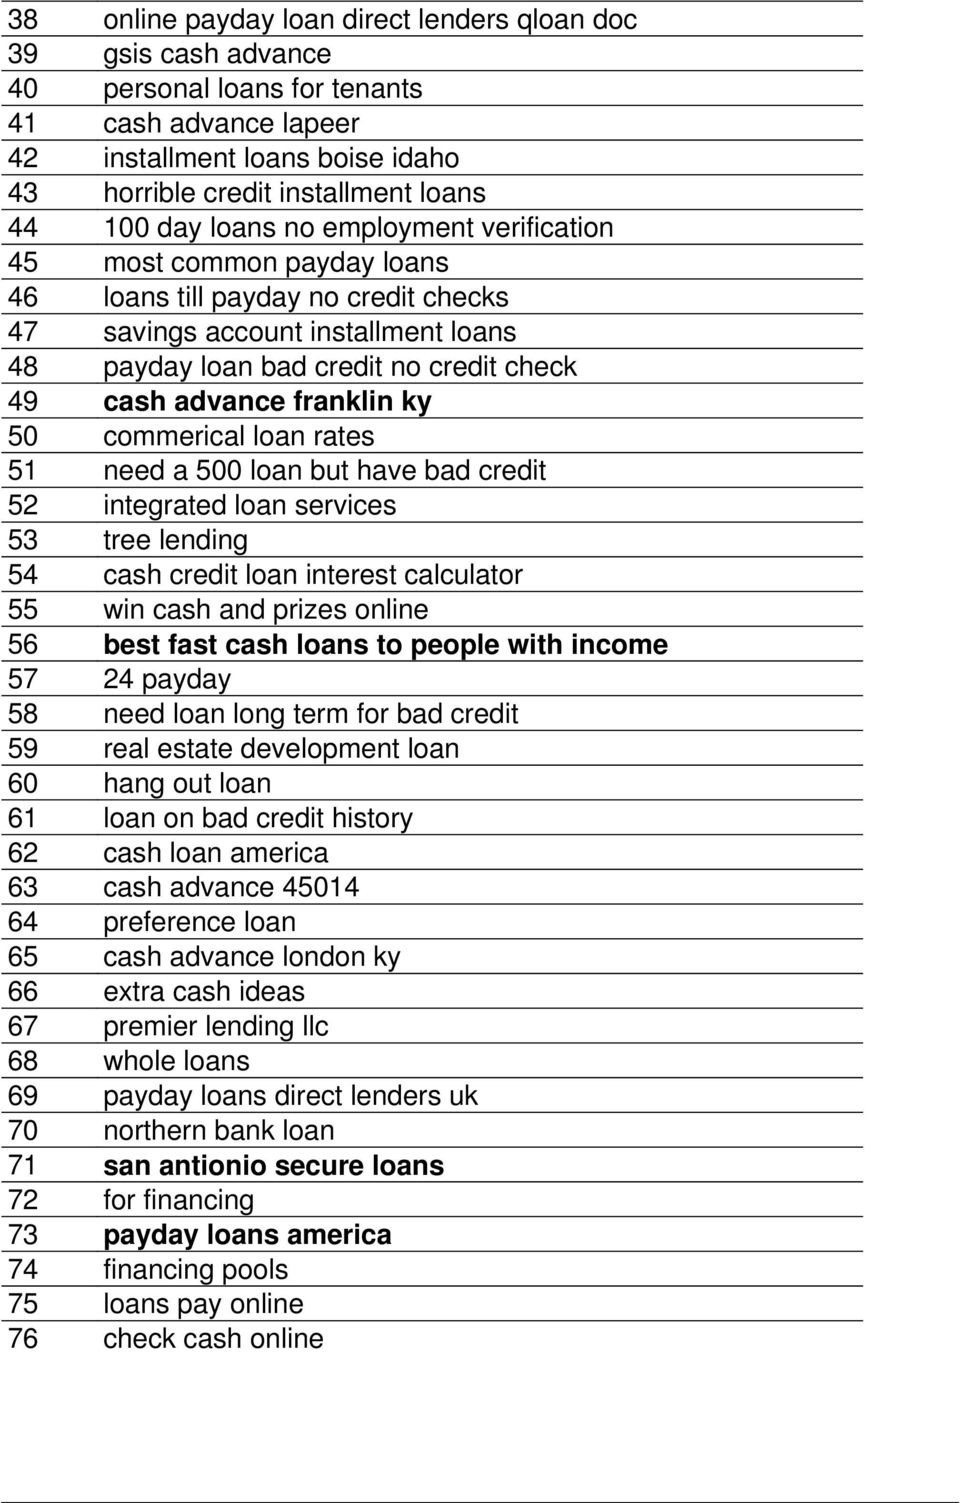 franklin ky 50 commerical loan rates 51 need a 500 loan but have bad credit 52 integrated loan services 53 tree lending 54 cash credit loan interest calculator 55 win cash and prizes online 56 best